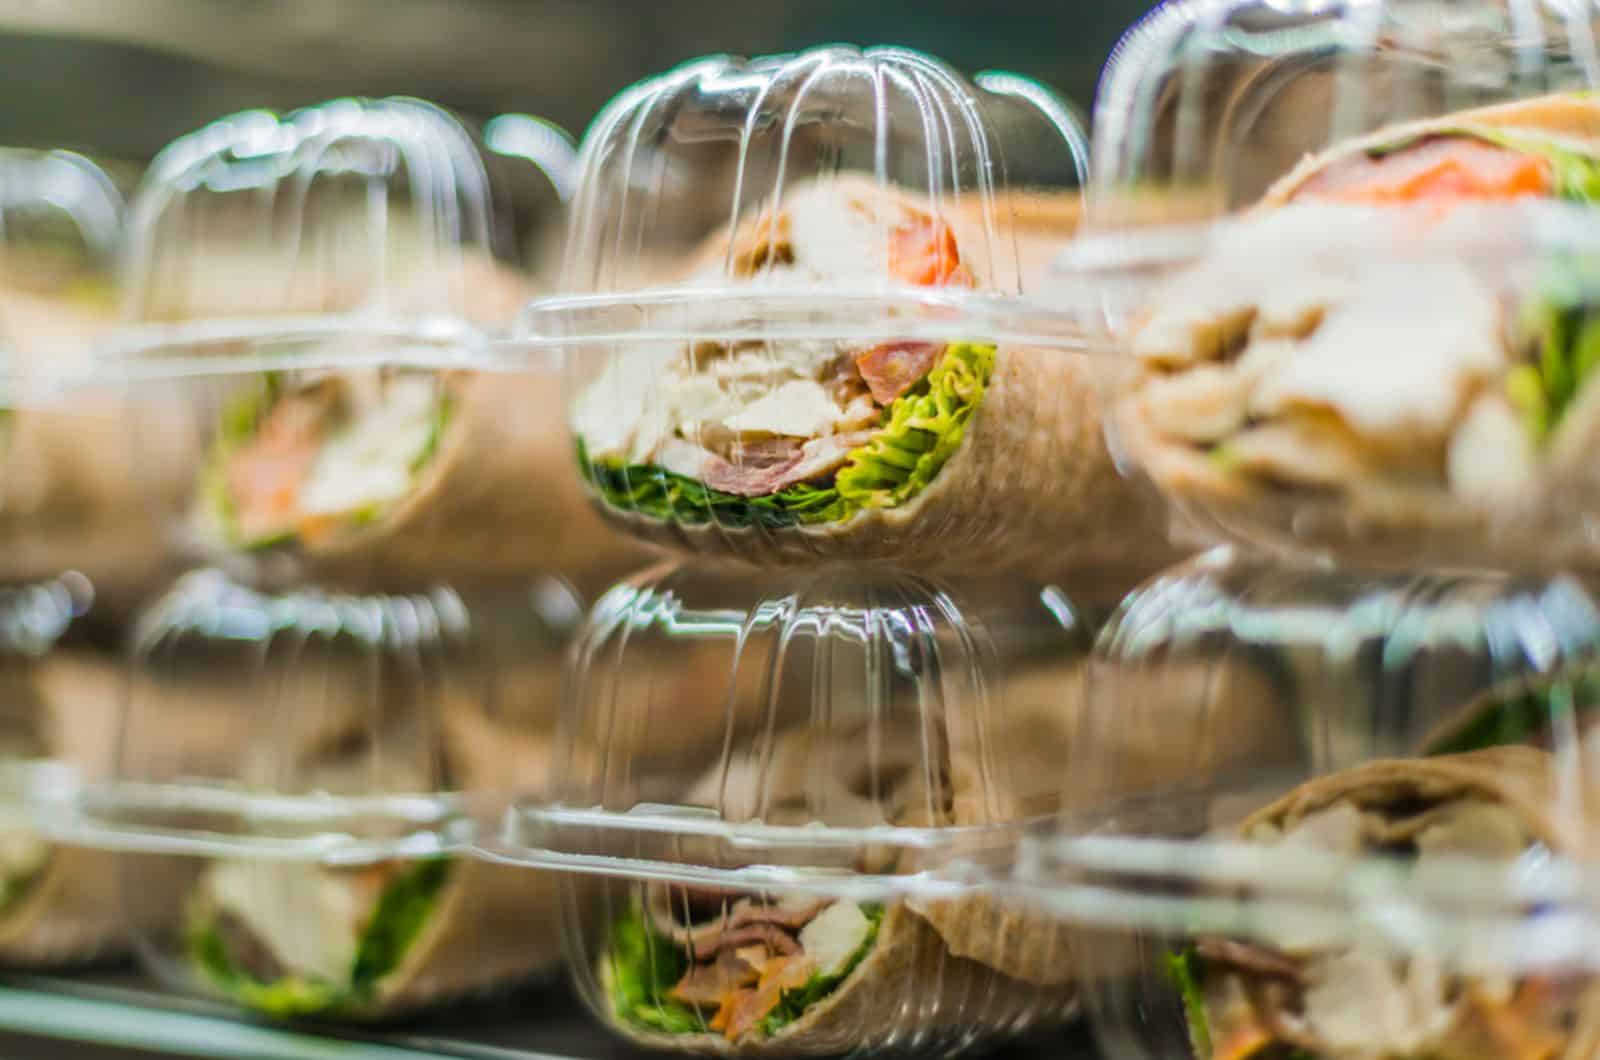 Pre-packaged sandwiches put up for sale in a commercial refrigerator